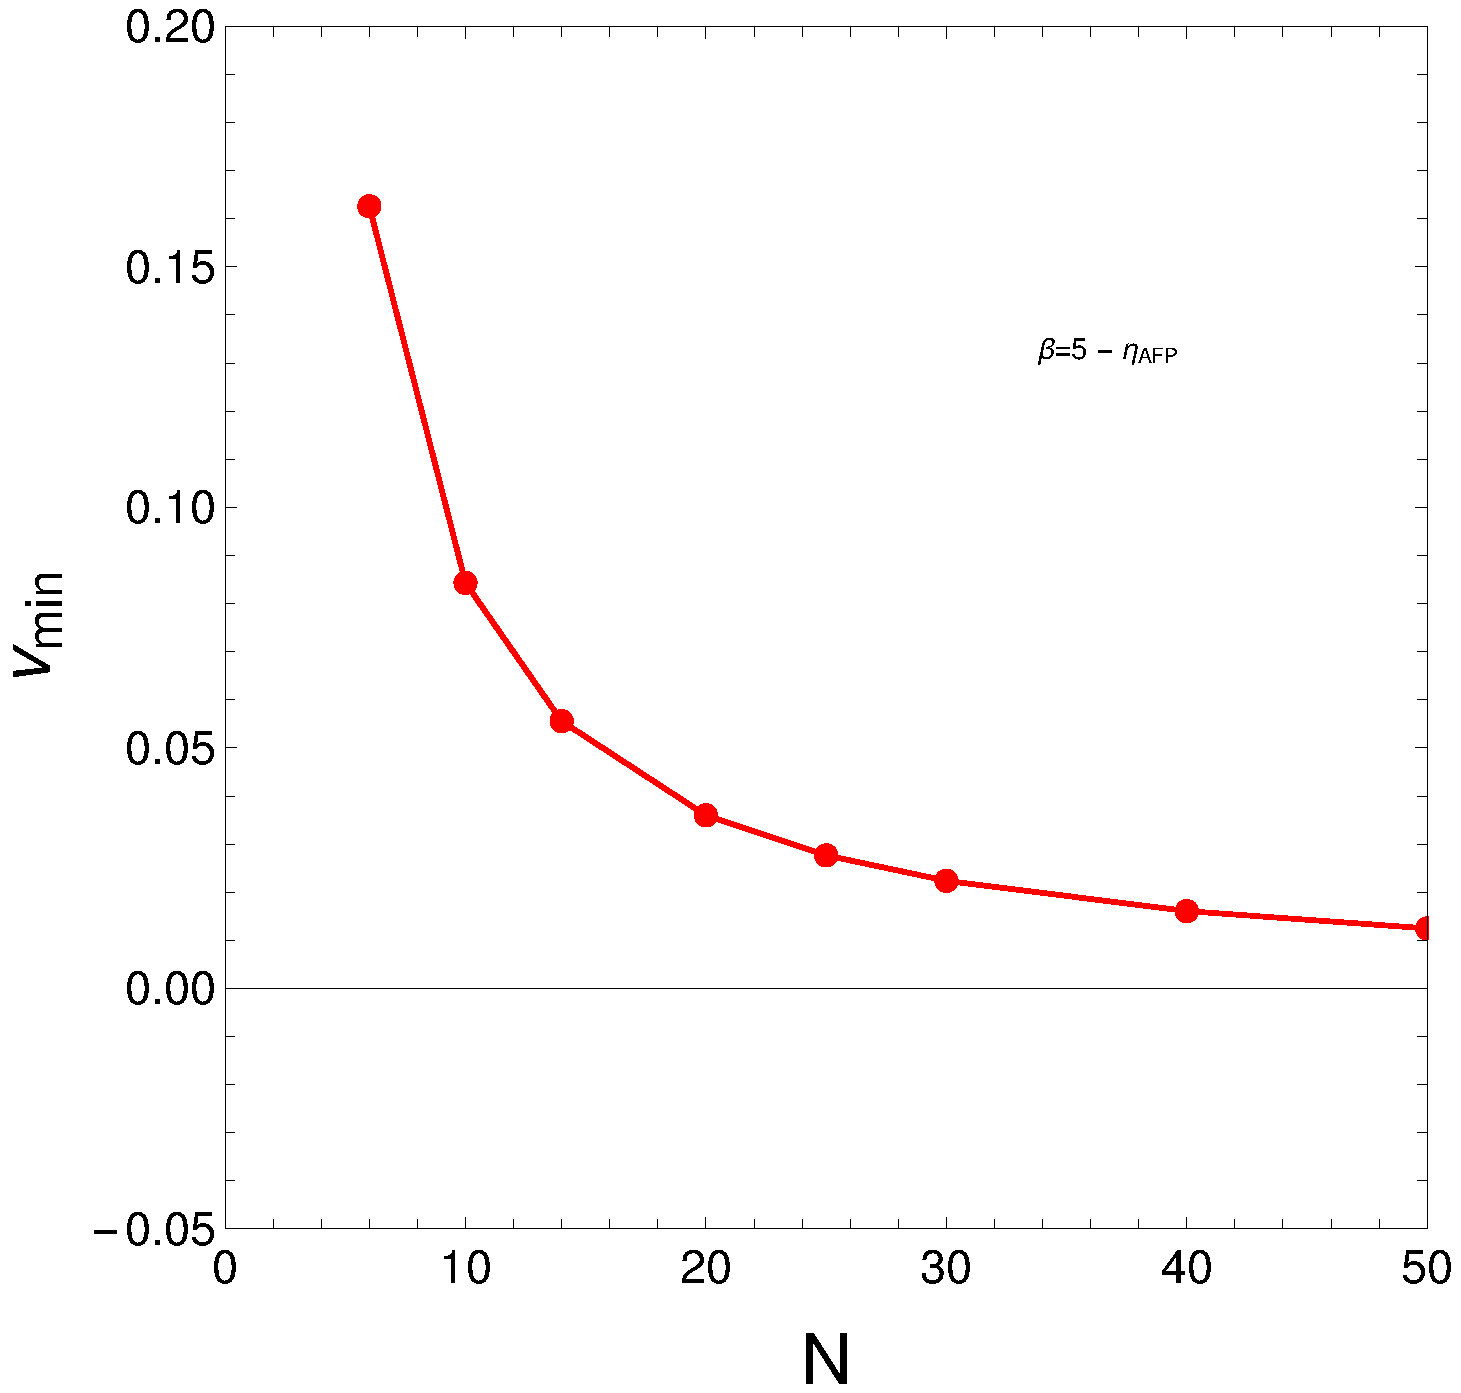 Critical v values versus N. Note that N > 250 does not make sense in a nuclear context.